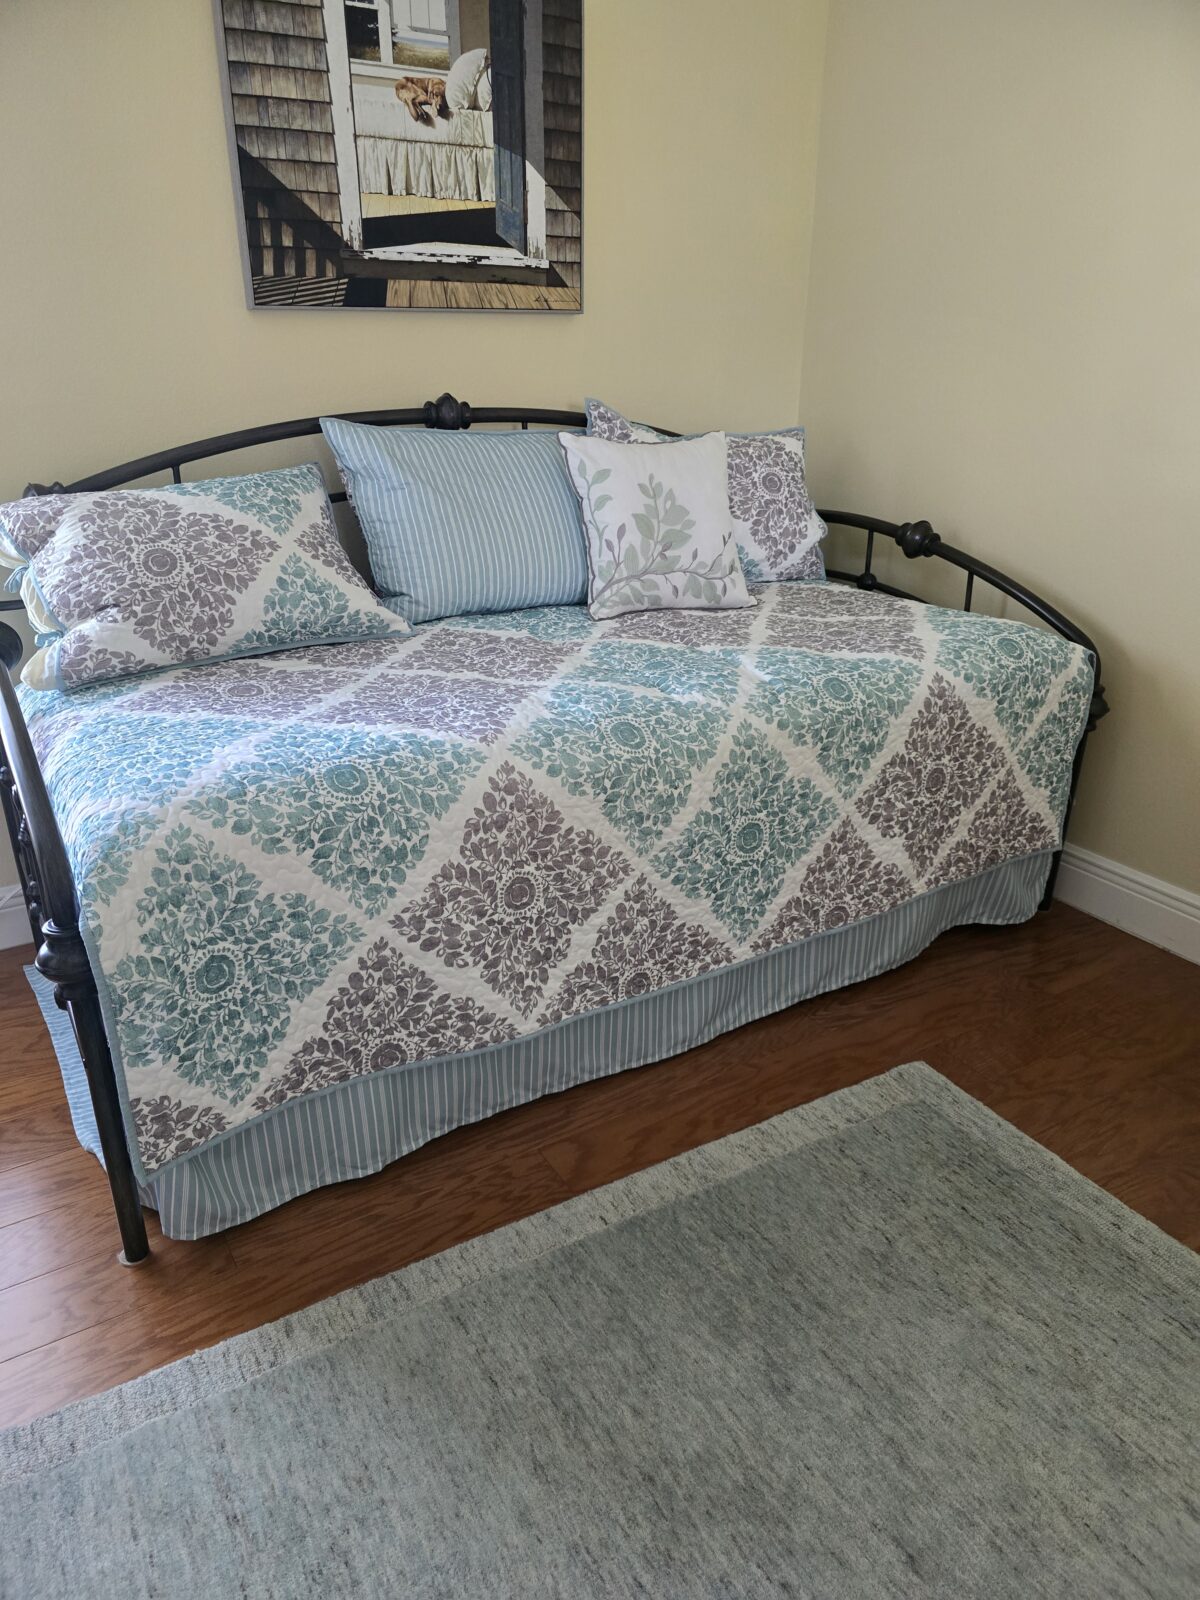 Twin Sized Bronze Metal Trundle Daybed | Villages-News.com | Classifieds